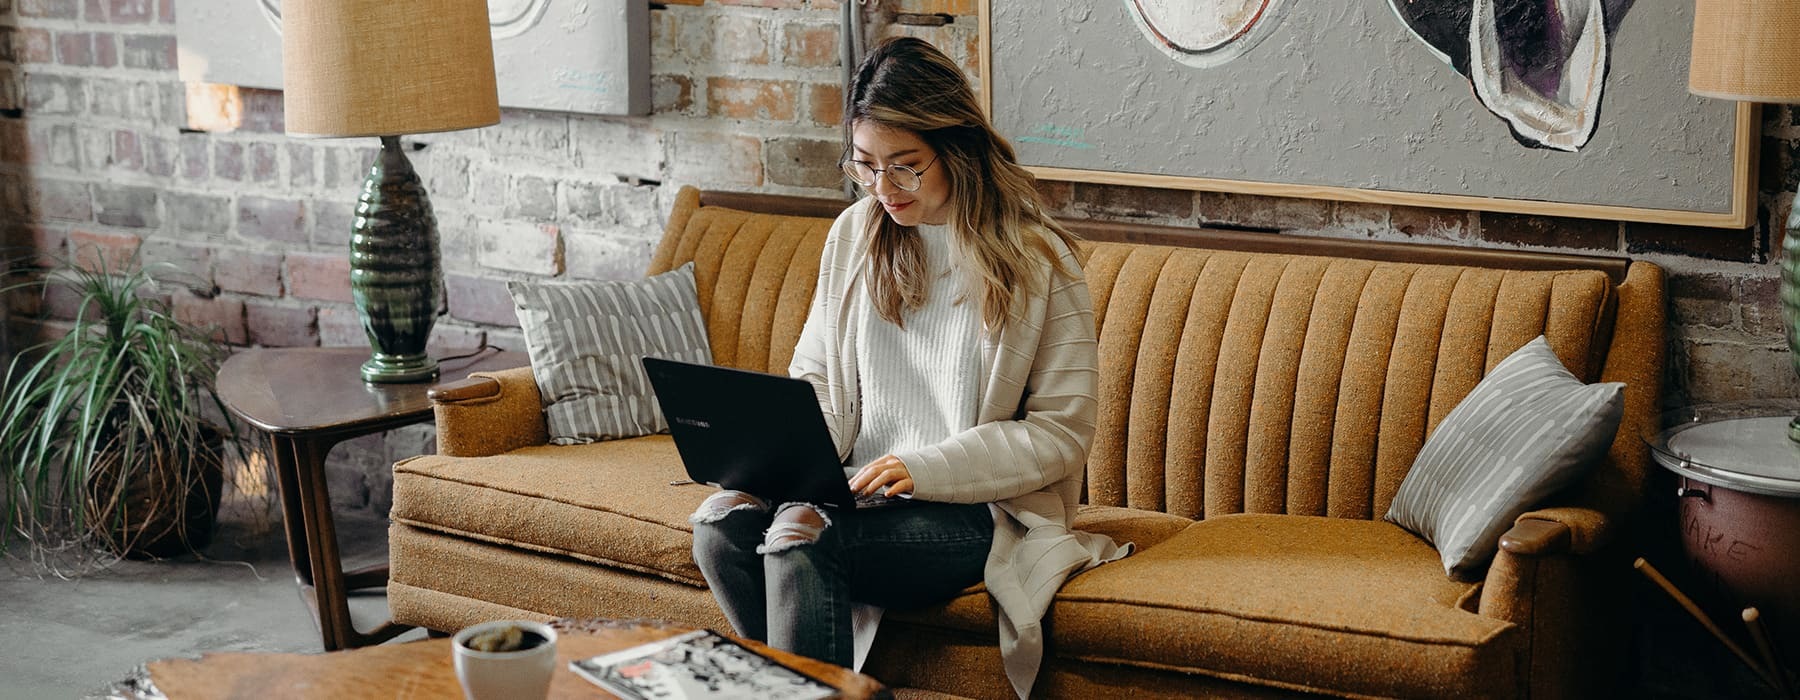 lifestyle image of a woman sitting on a couch working on her laptop